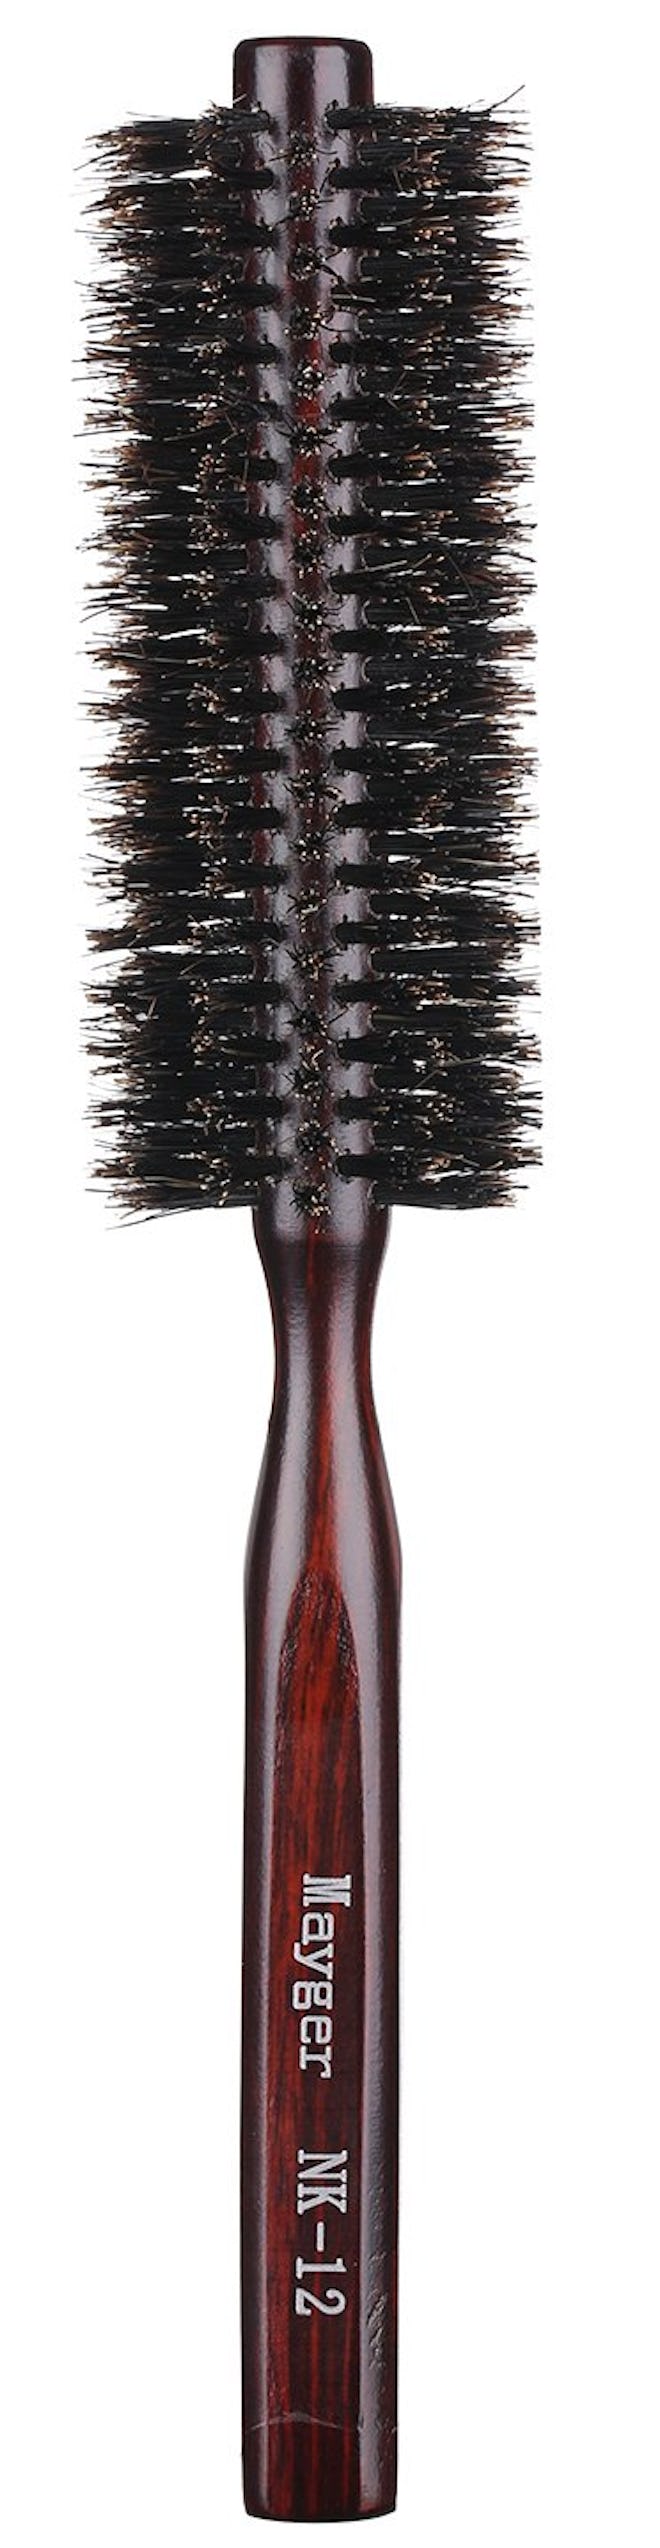 This round brush for bangs is made from boar bristles for volume and curl.